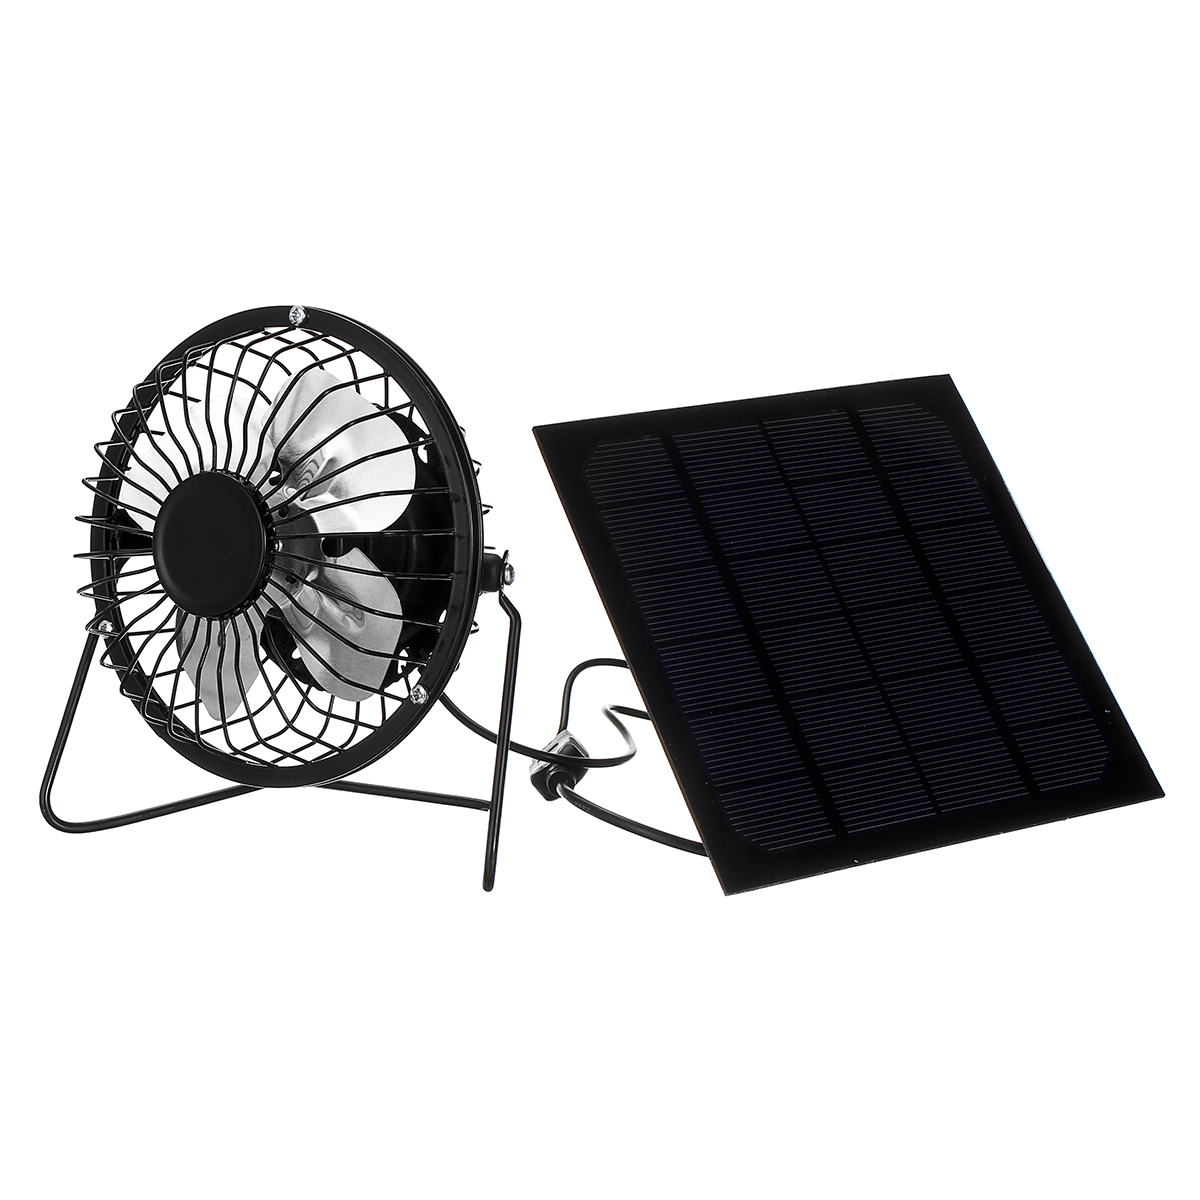 5W-Protable-Solar-Panel--4inch-Cooling-Fan-Kit-with-USB-Port-for-Home-Outdoor-1544809-2